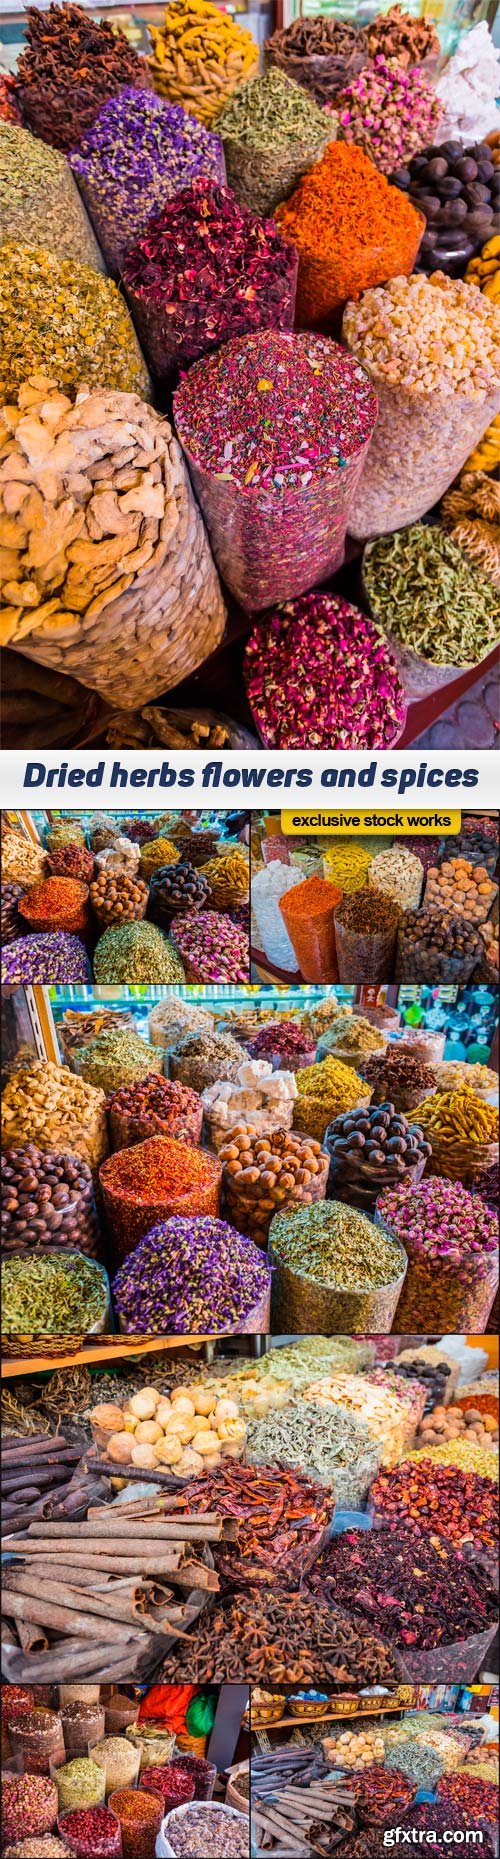 Dried herbs flowers and spices 7x JPEG